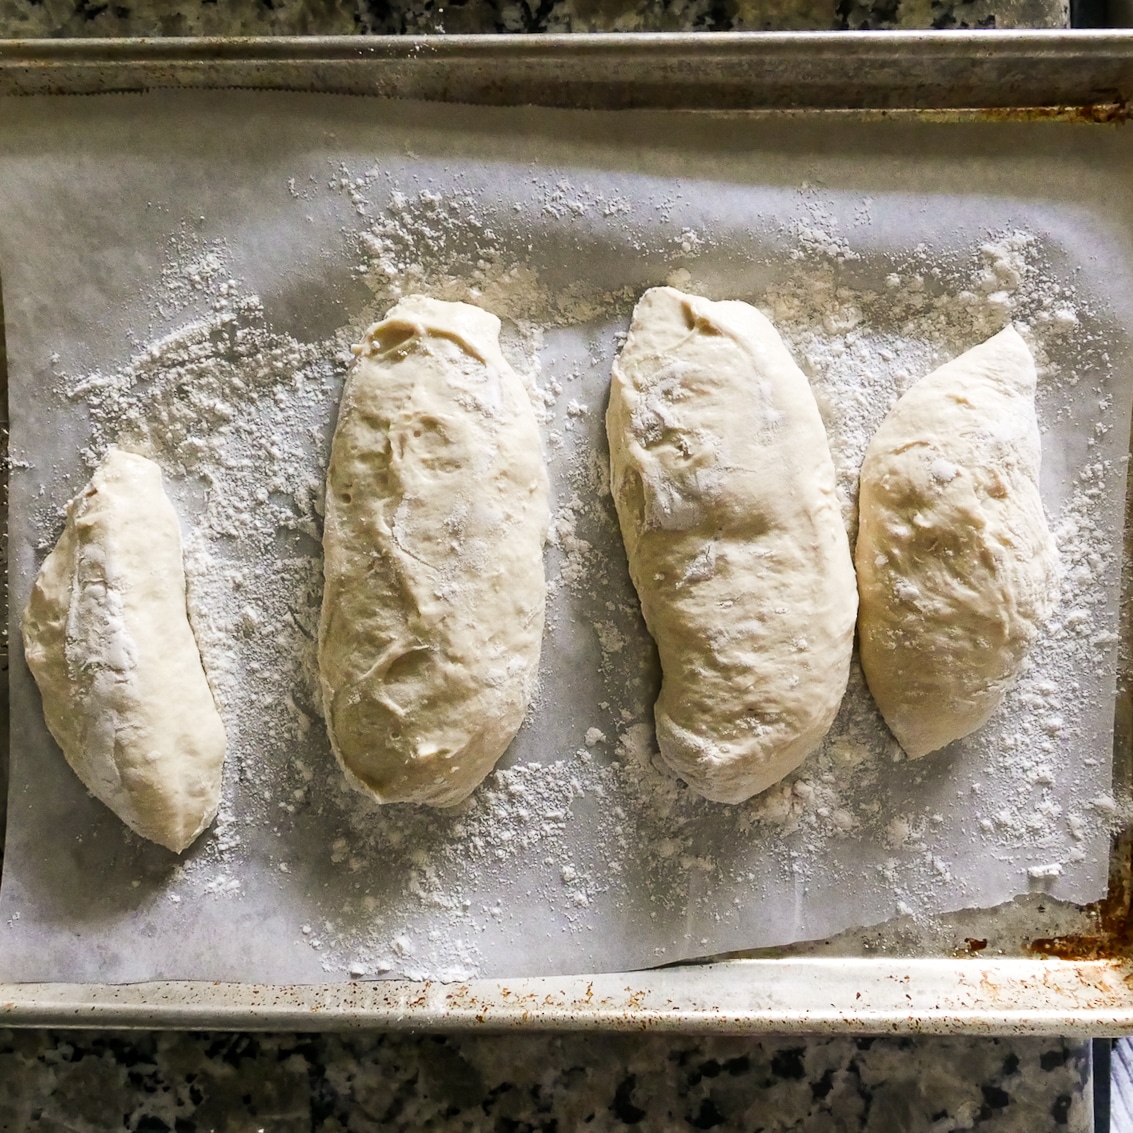 four ciabatta rolls resting on a baking sheet and ready to be baked. 